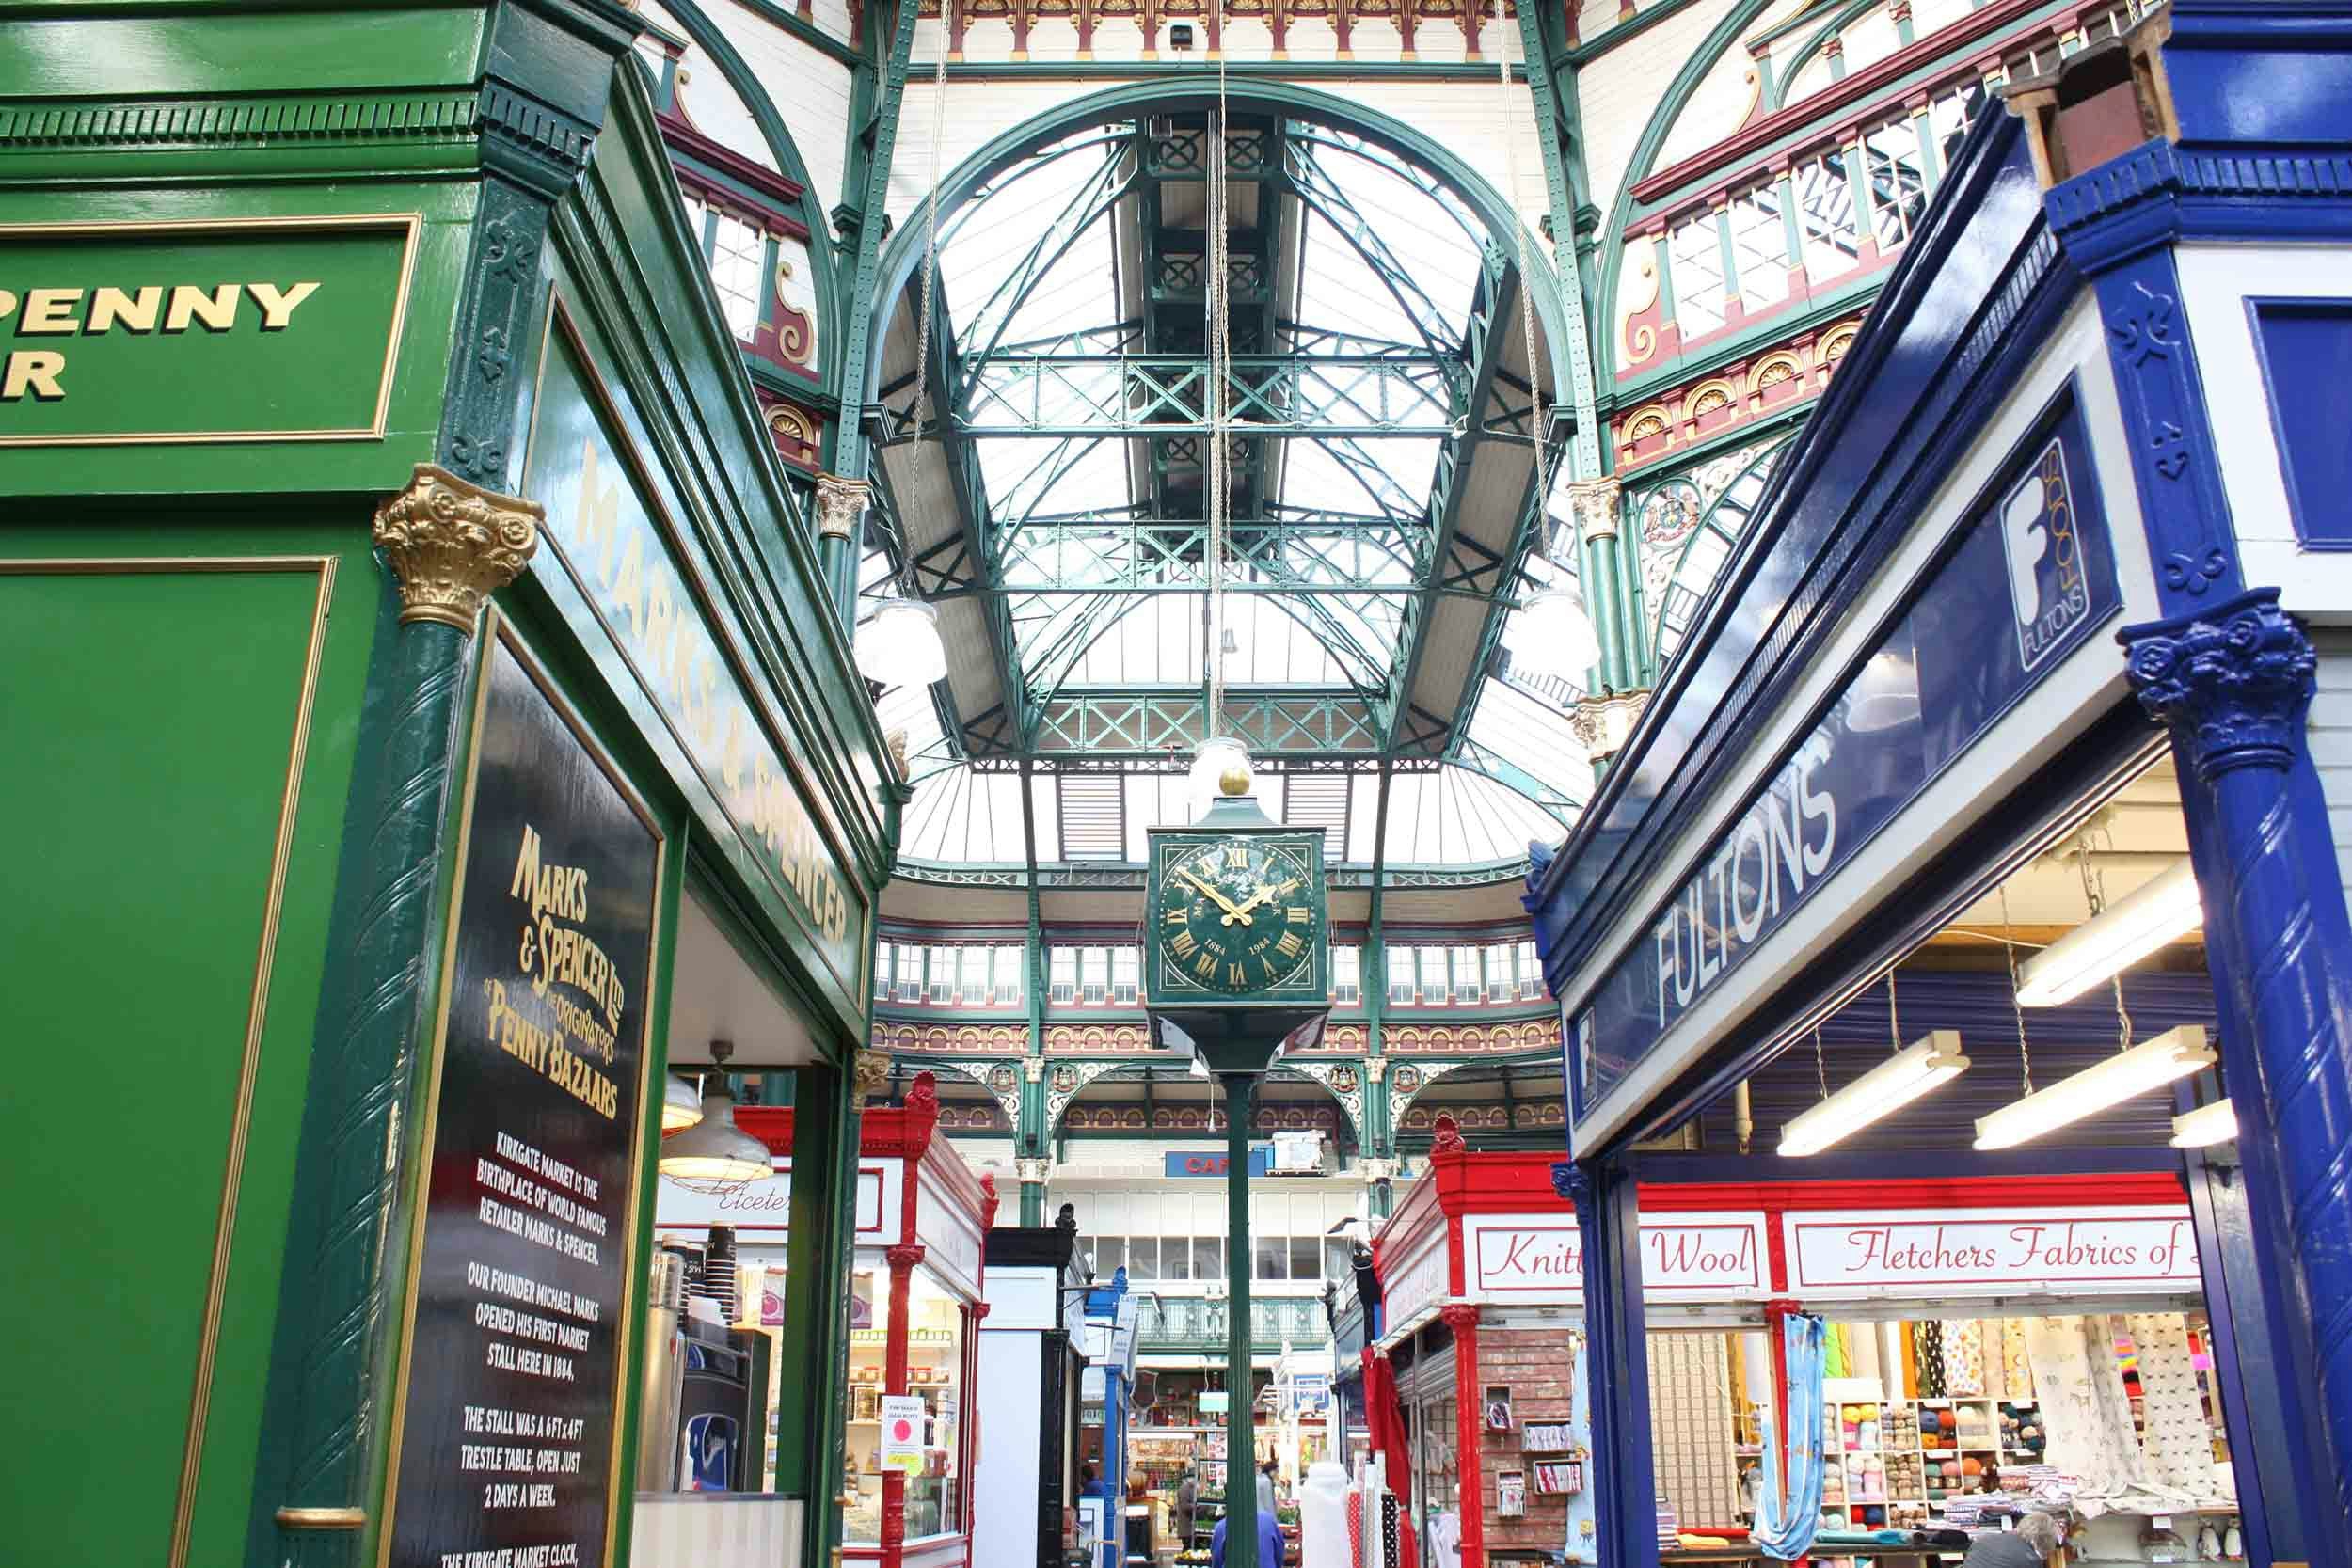 The festival will be held in the street-food hangar at Kirkgate Market